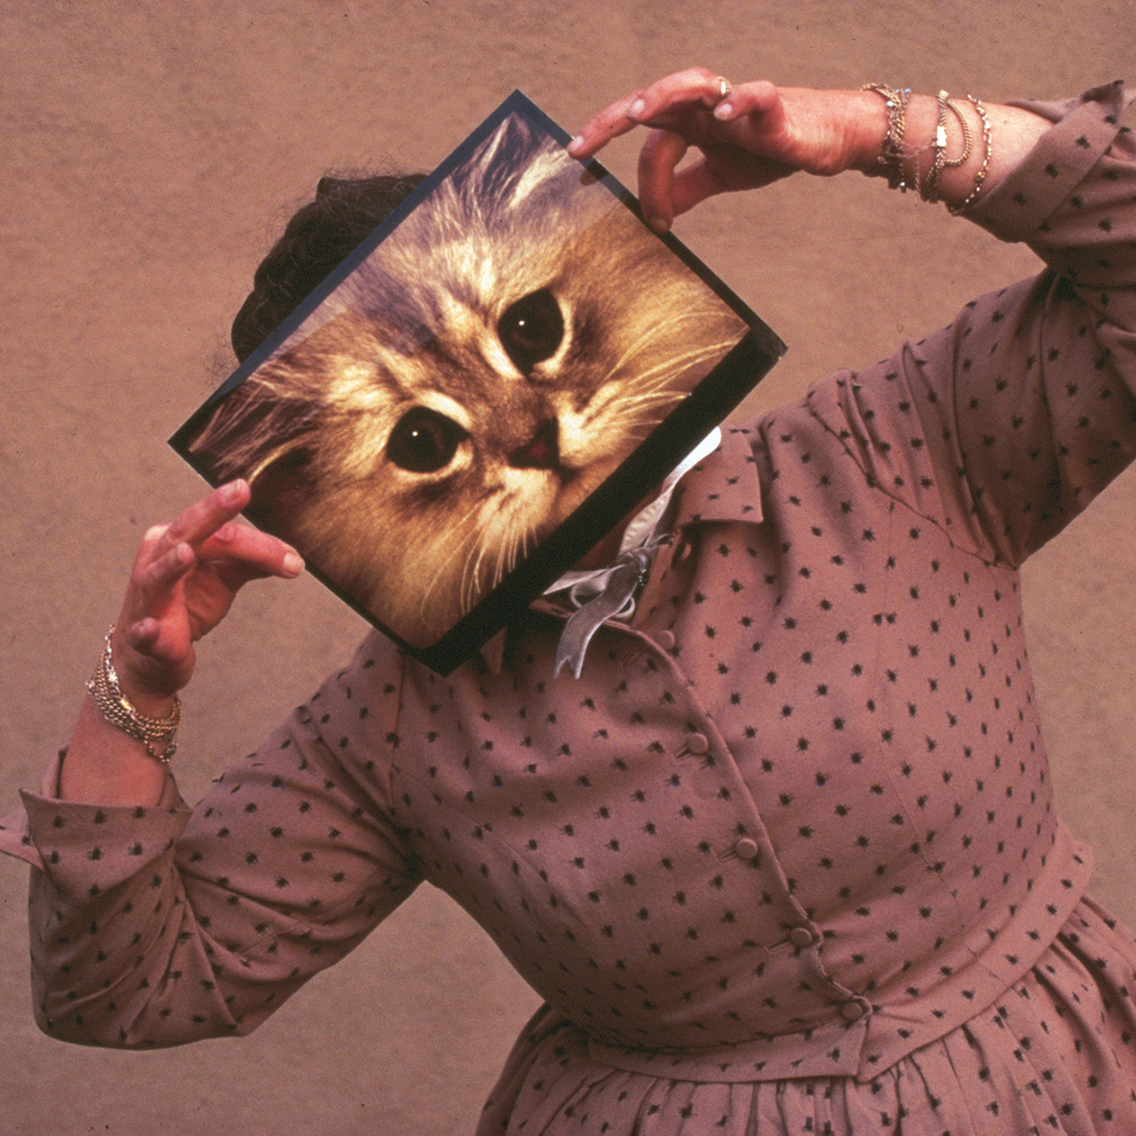 Ray Eames posing with a cat photograph, December 1970 © Eames Office LLC